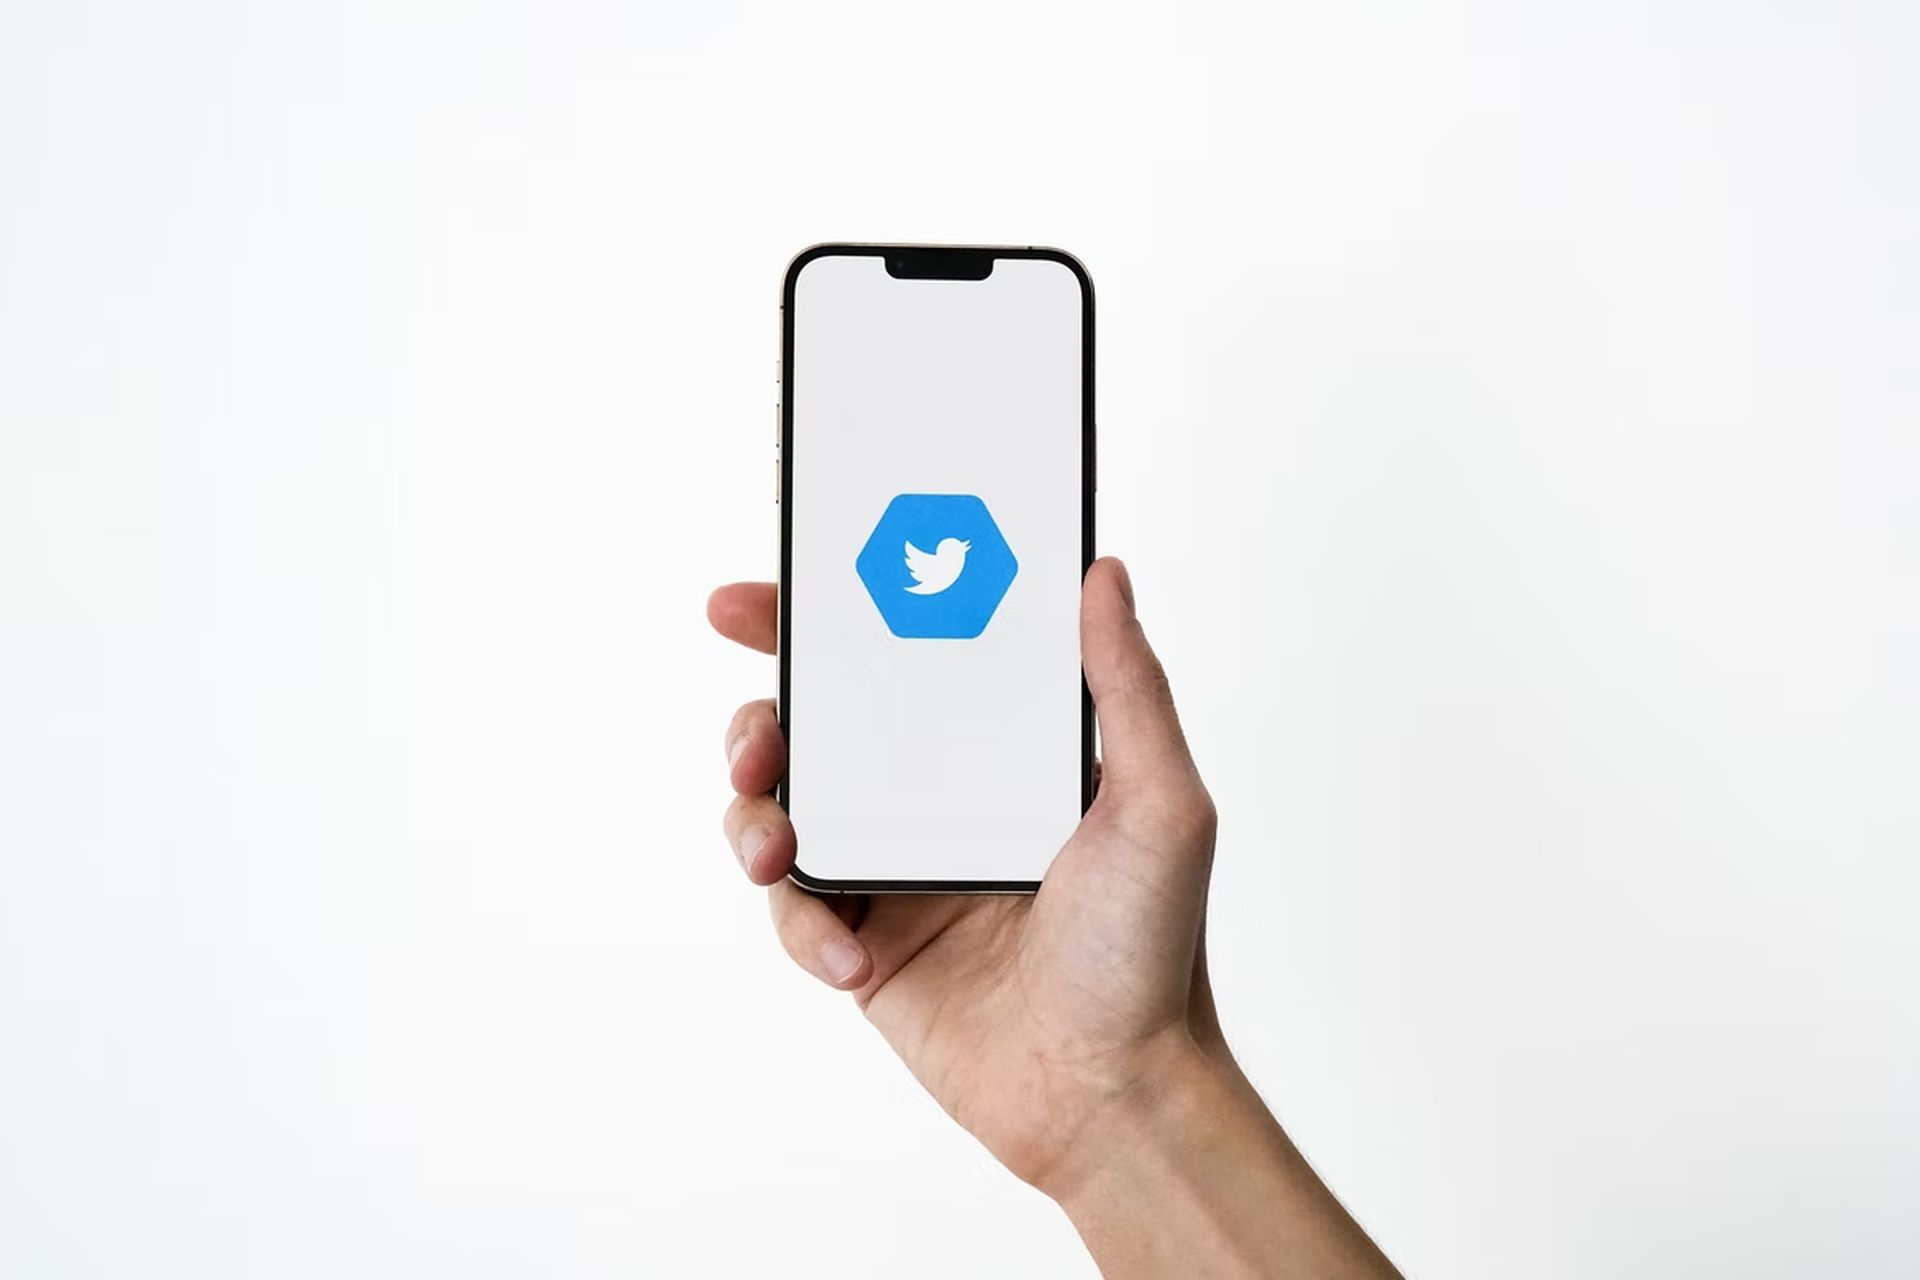 Over 3200 mobile apps have been found by security experts to be leaking Twitter API keys, potentially allowing threat actors to take over user accounts.